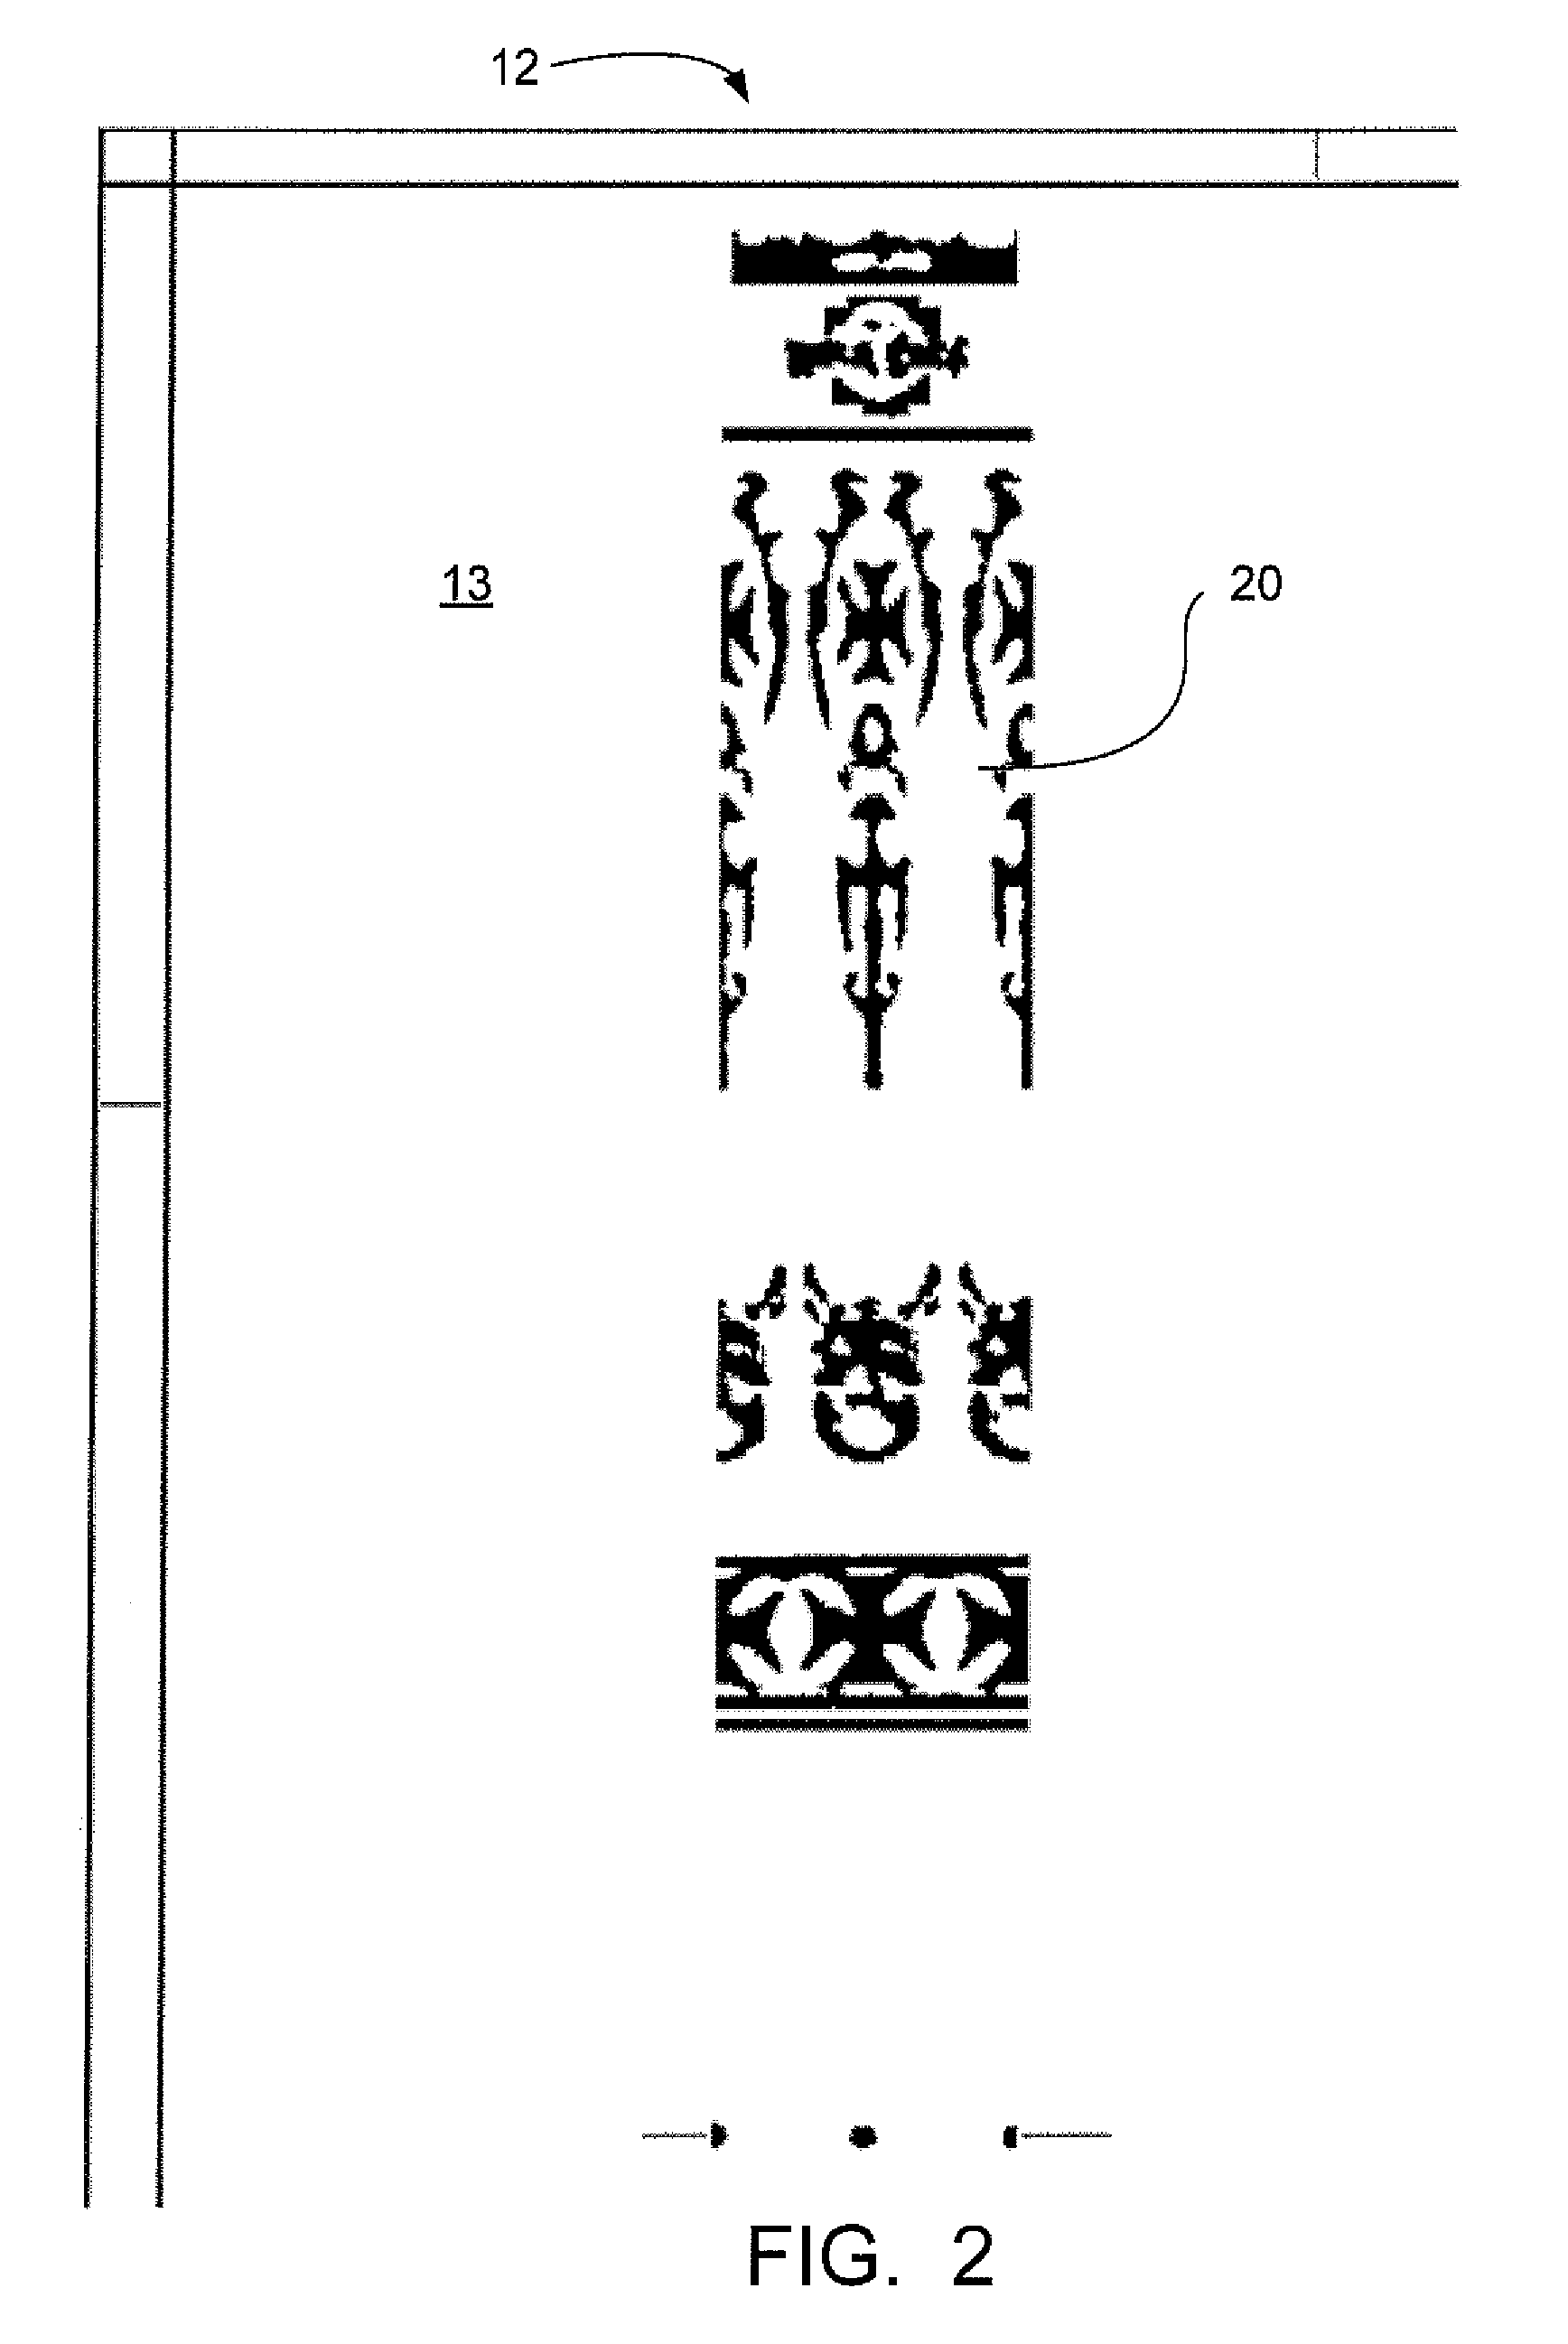 Process for producing and applying a laser heat transfer capable of printing on flat, cylindrical, curved, and irregularly shaped objects